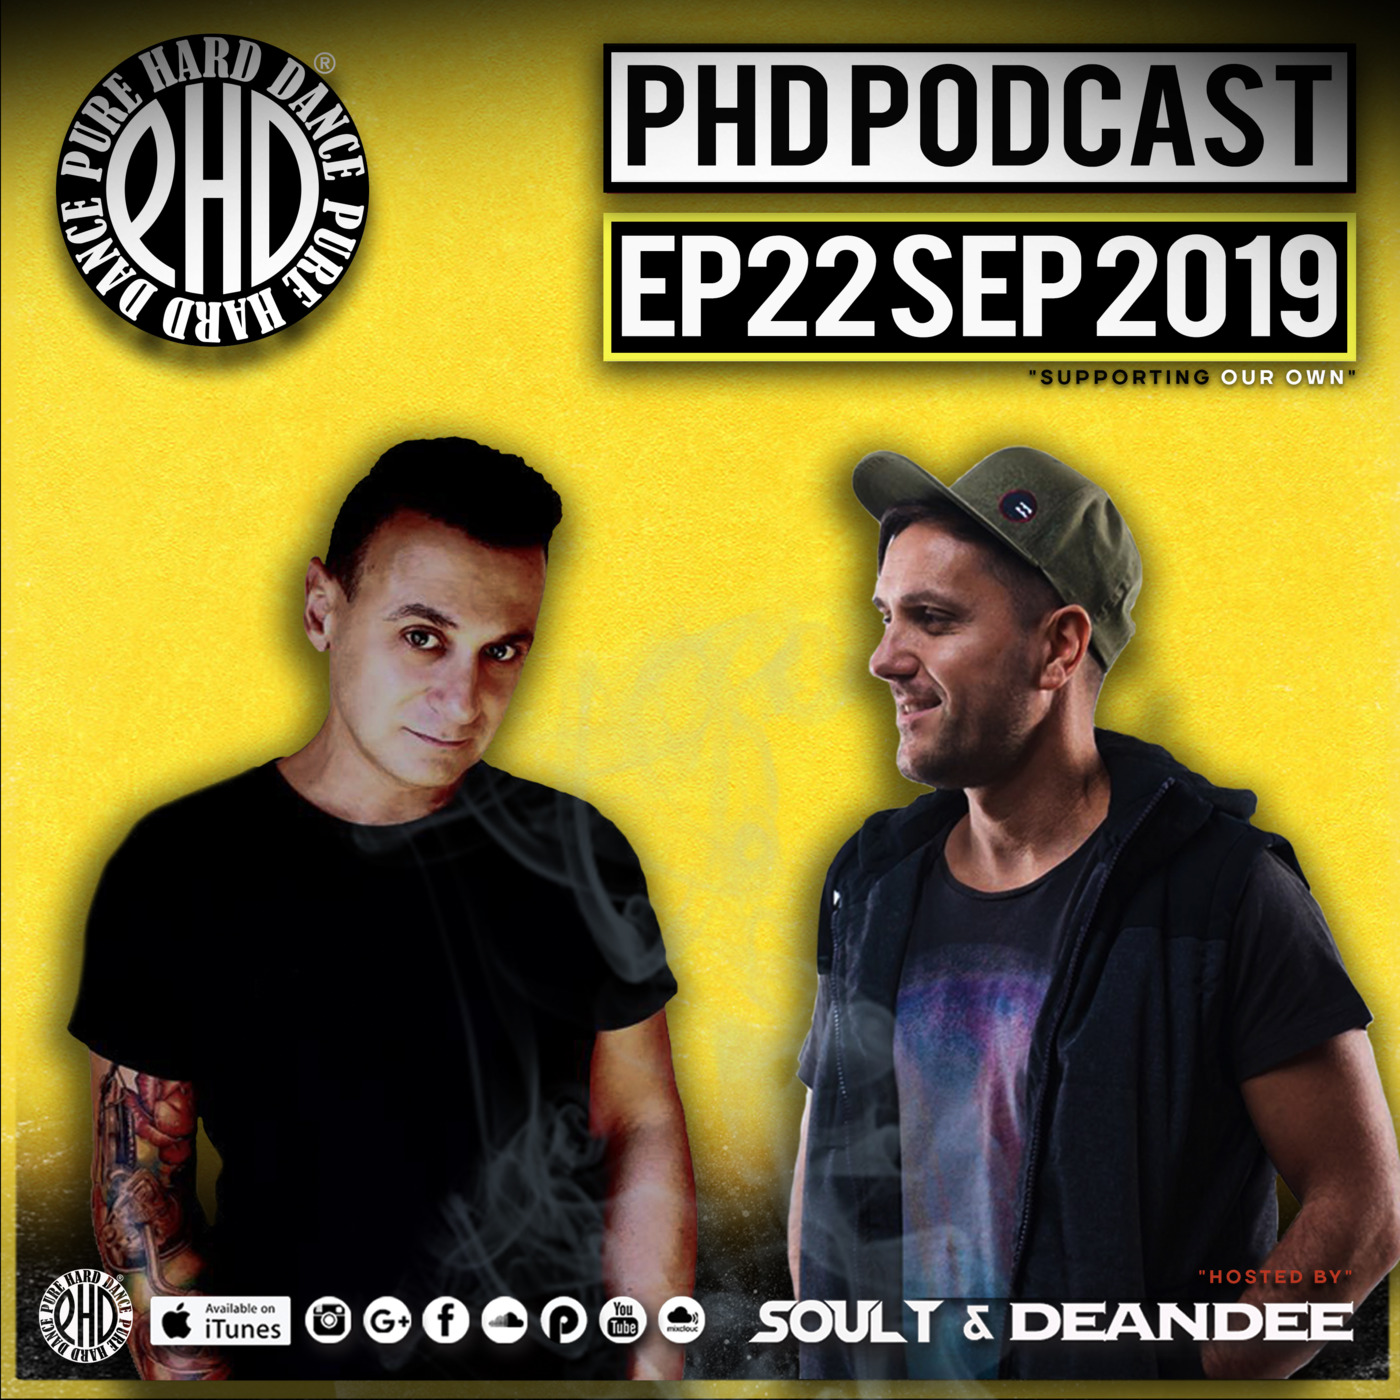 EP22 PHD PODCAST SEPTEMBER 2019 HOSTED BY SOUL T & DEAN DEE